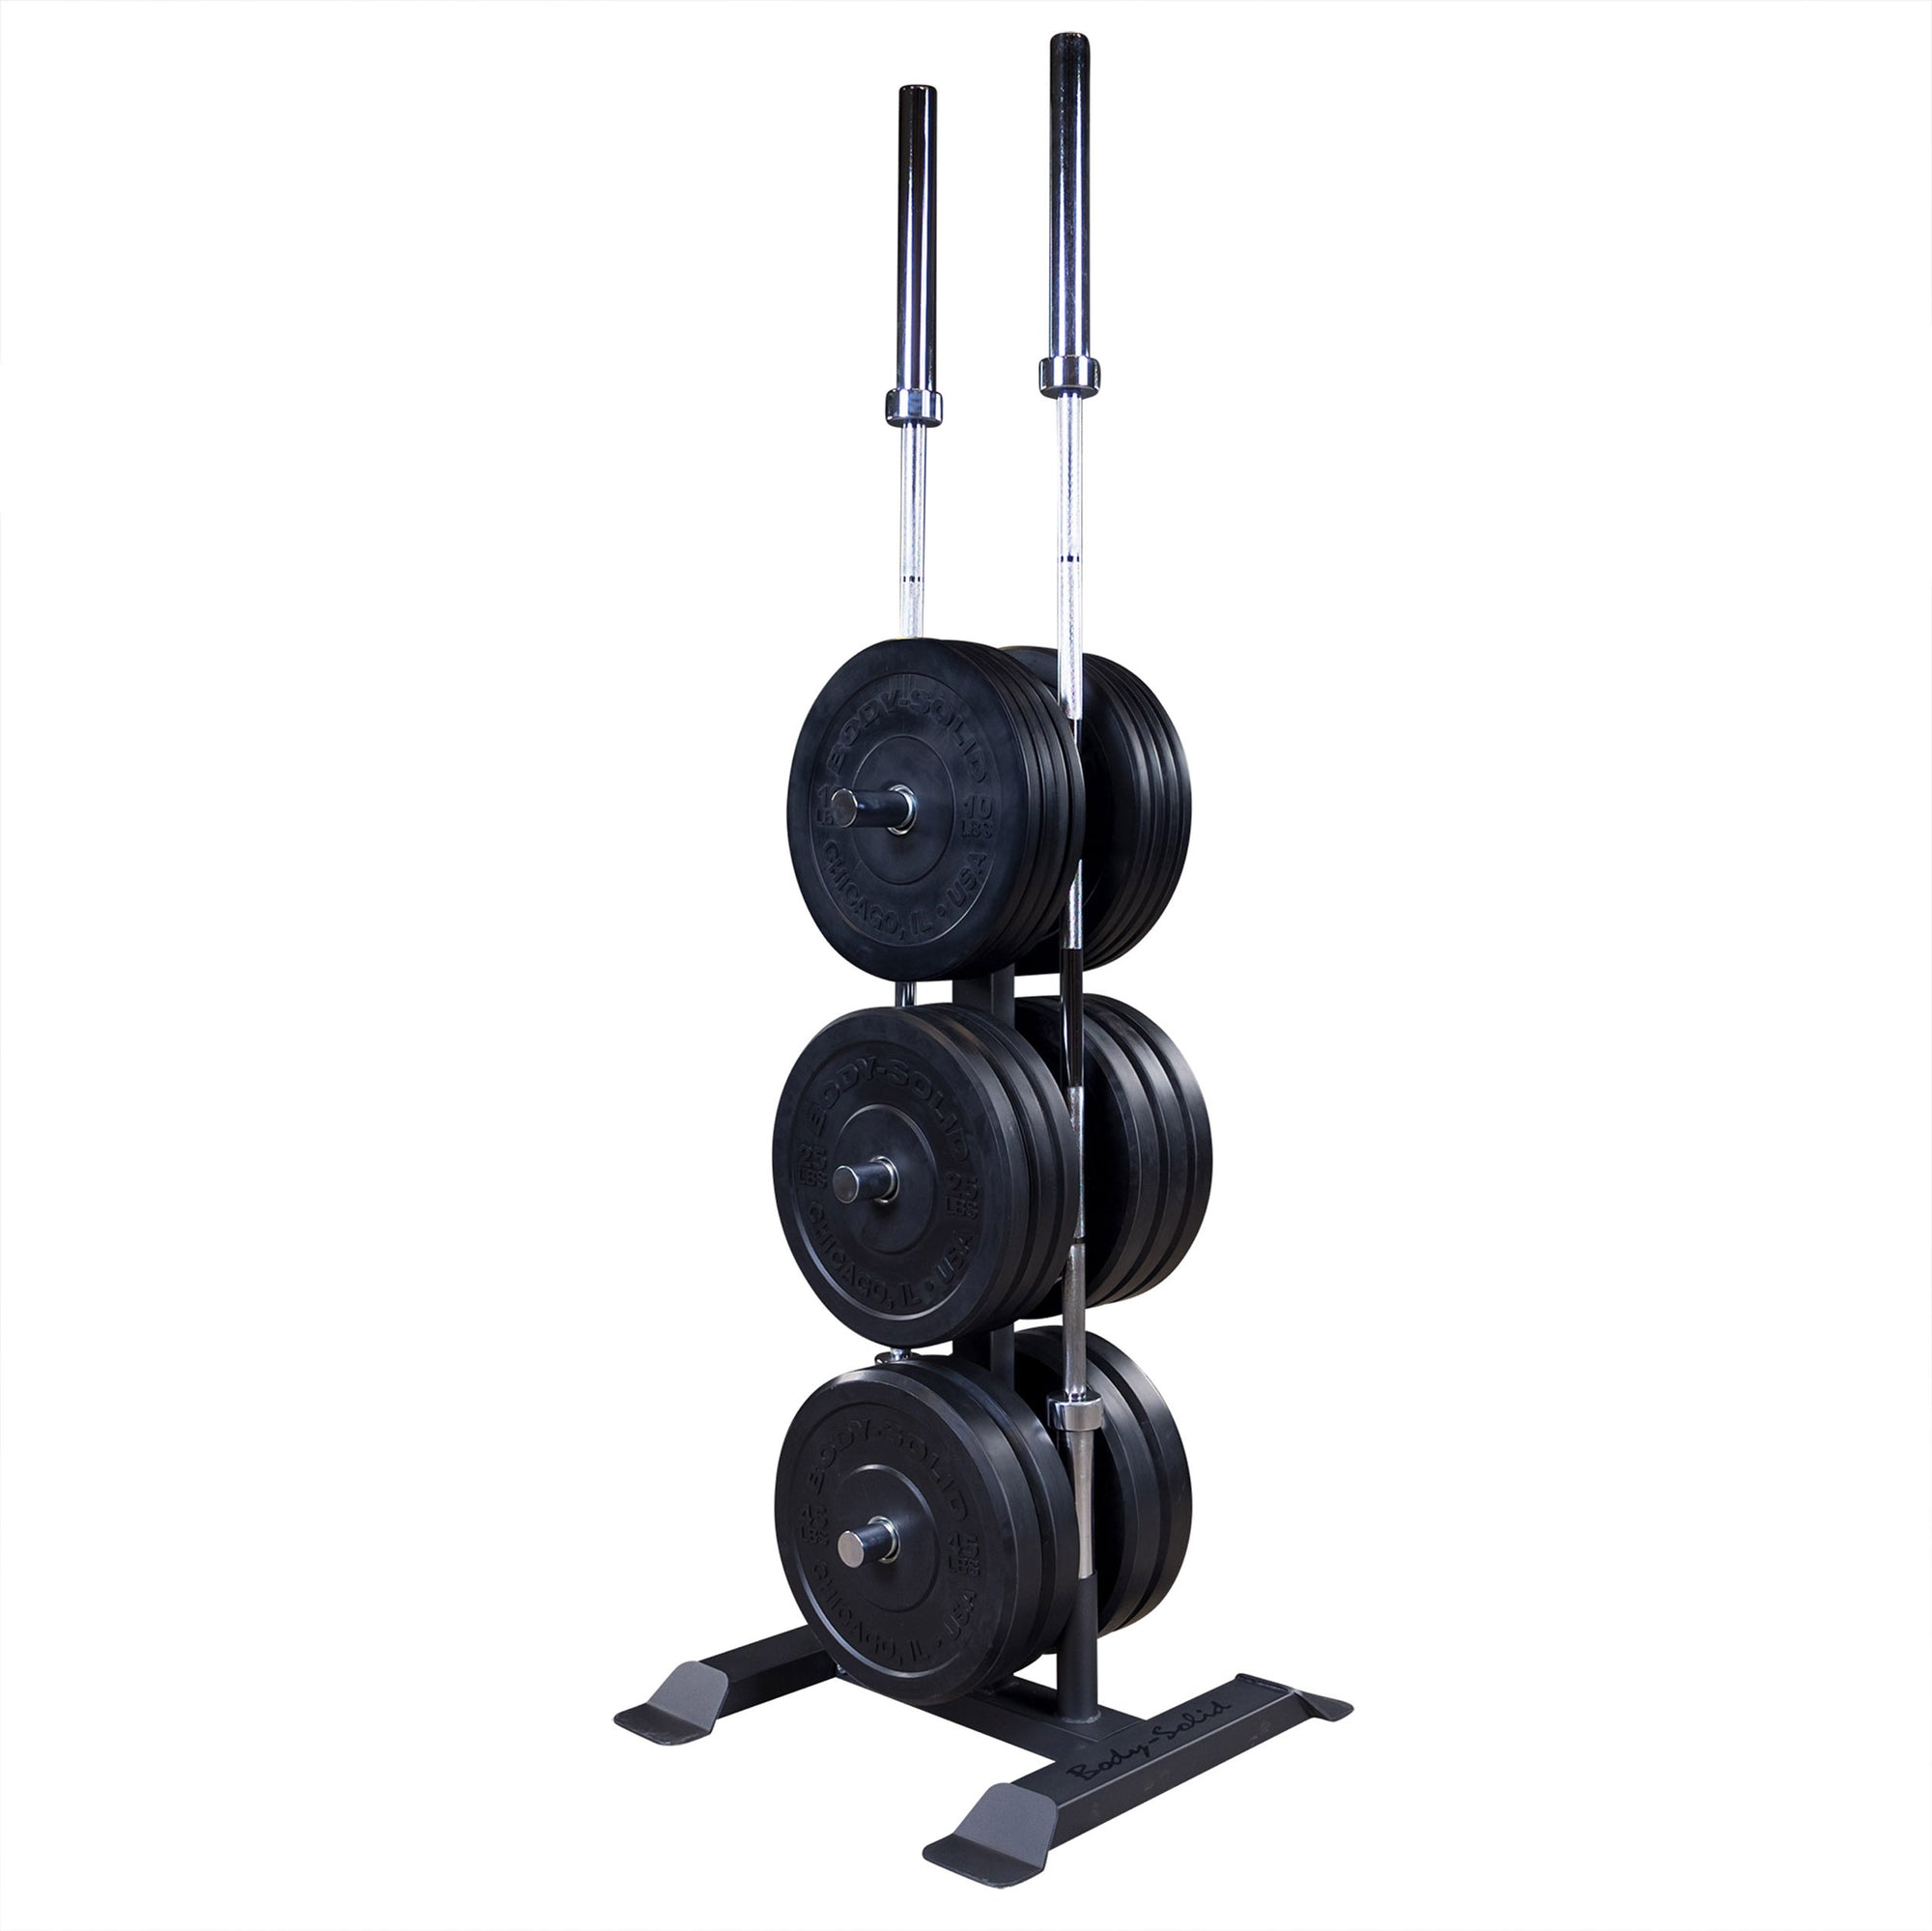 Body-Solid Olympic Weight Plate Tree & Barbell Holder